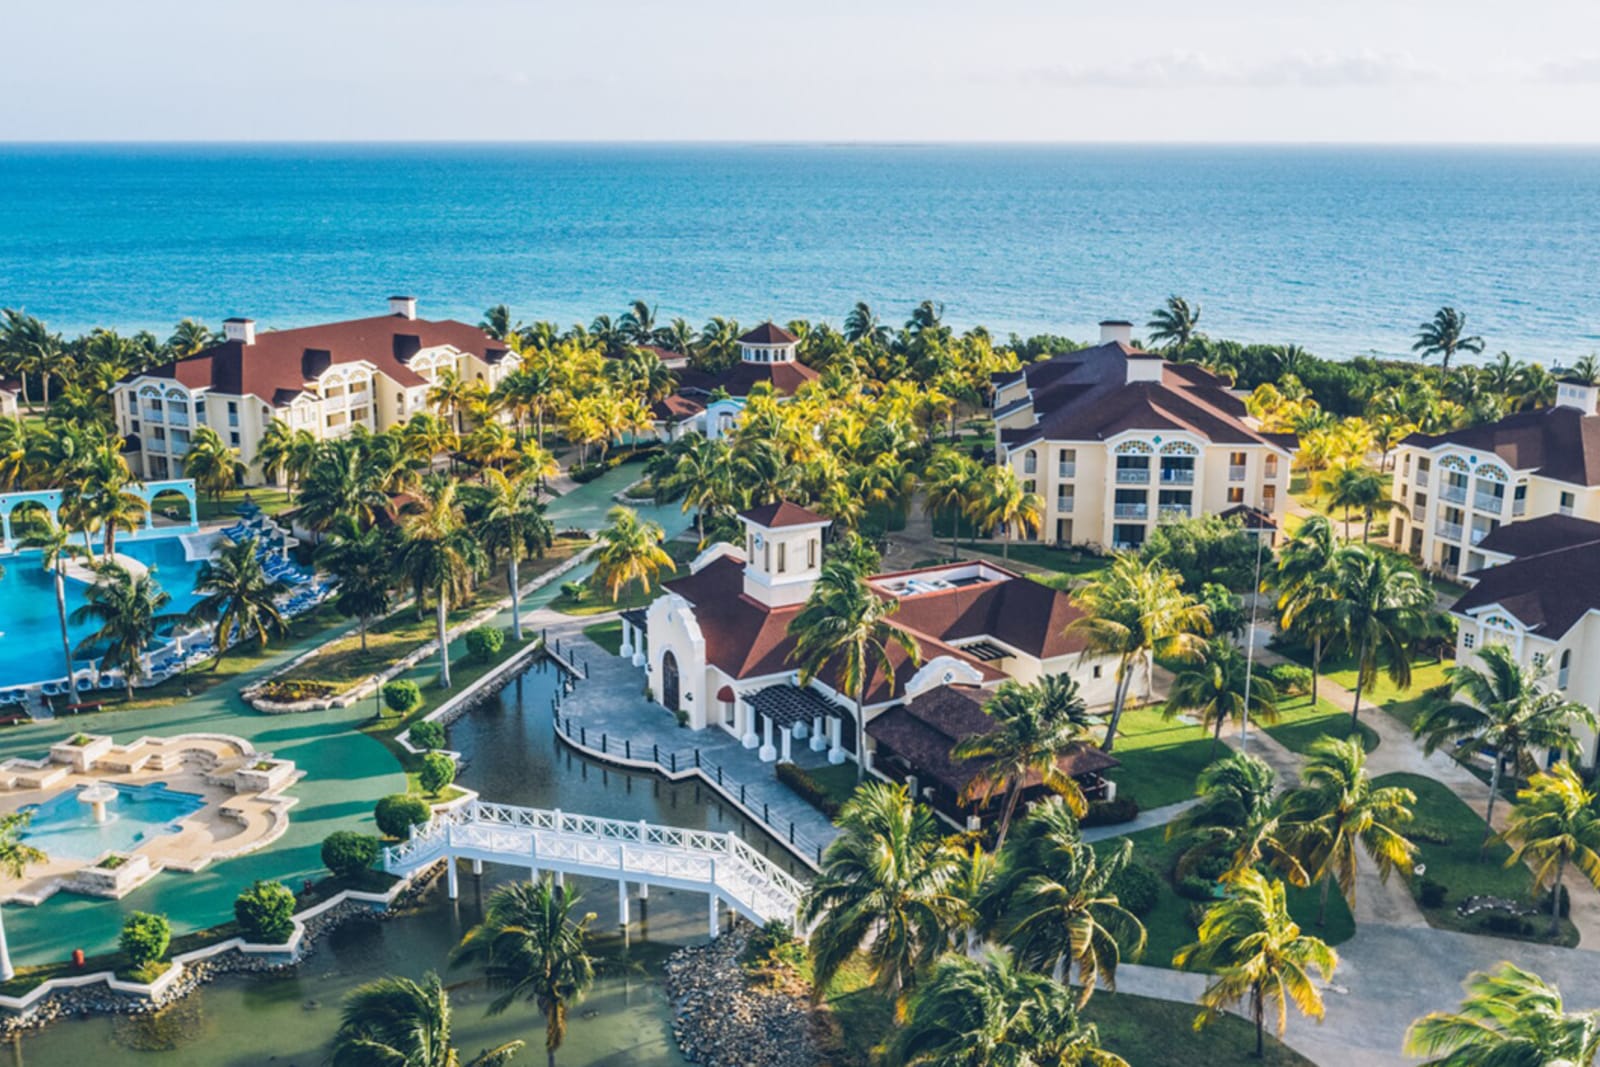 A birds-eye view of the adults-only all-inclusive Iberostar Playa Alameda resort in Varadero, Cuba